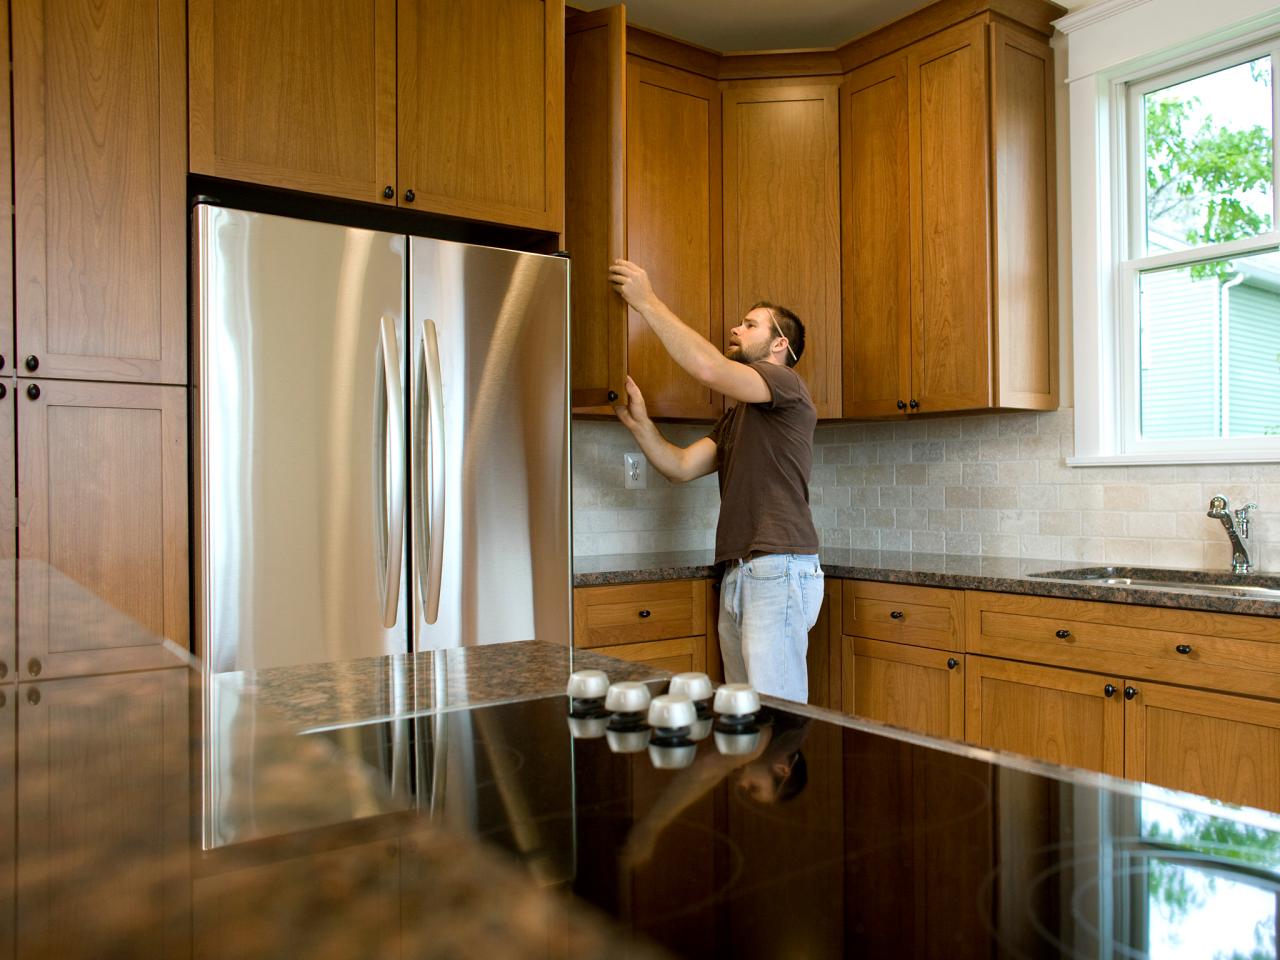 How To Install Kitchen Cabinets, How To Replace Kitchen Wall Tiles Without Removing Cabinets